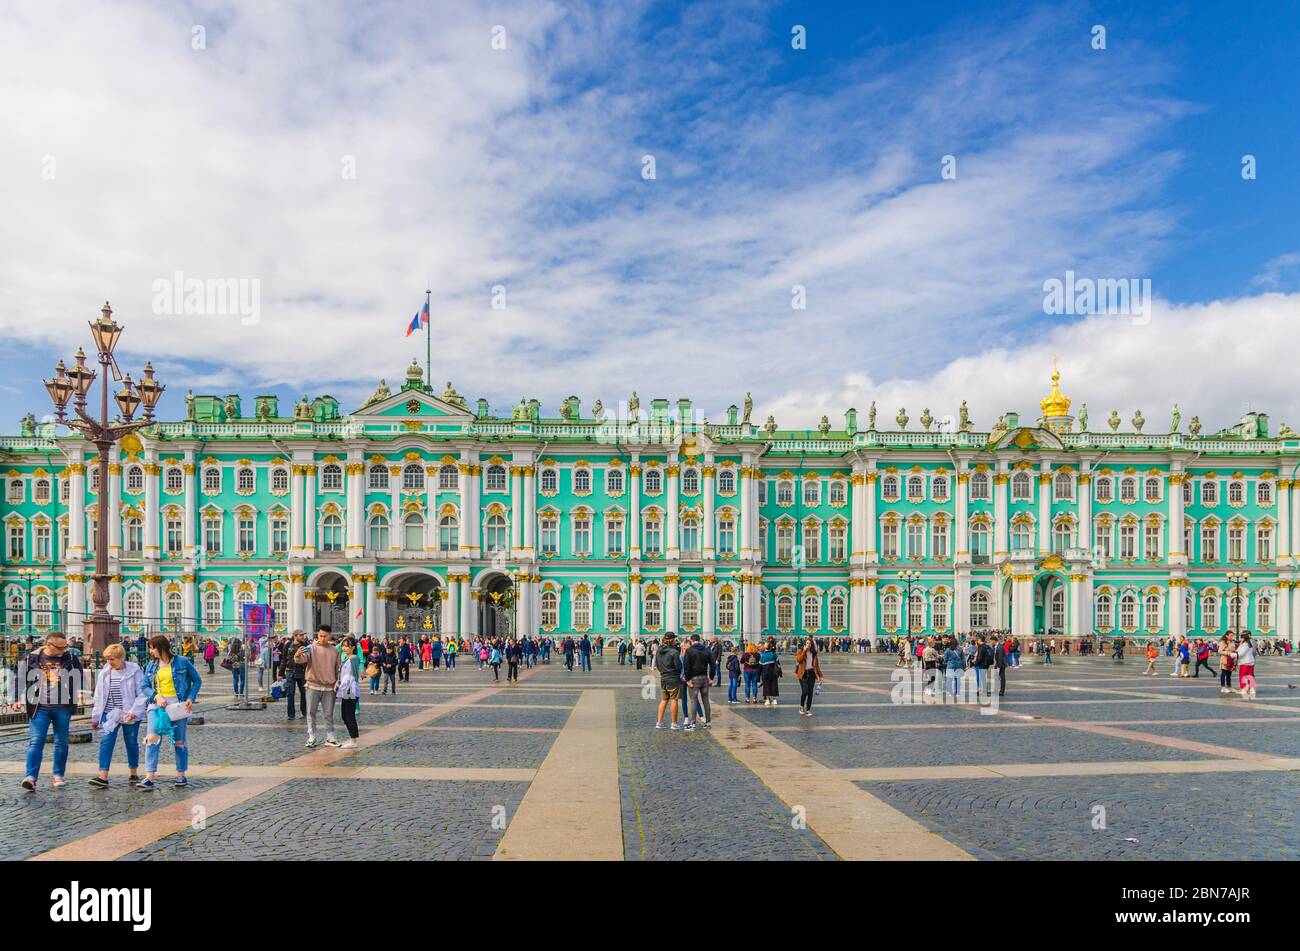 Saint Petersburg, Russia, August 3, 2019: The State Hermitage Museum building, The Winter Palace official residence of the Russian Emperors and people tourists are walking on Palace Square Stock Photo